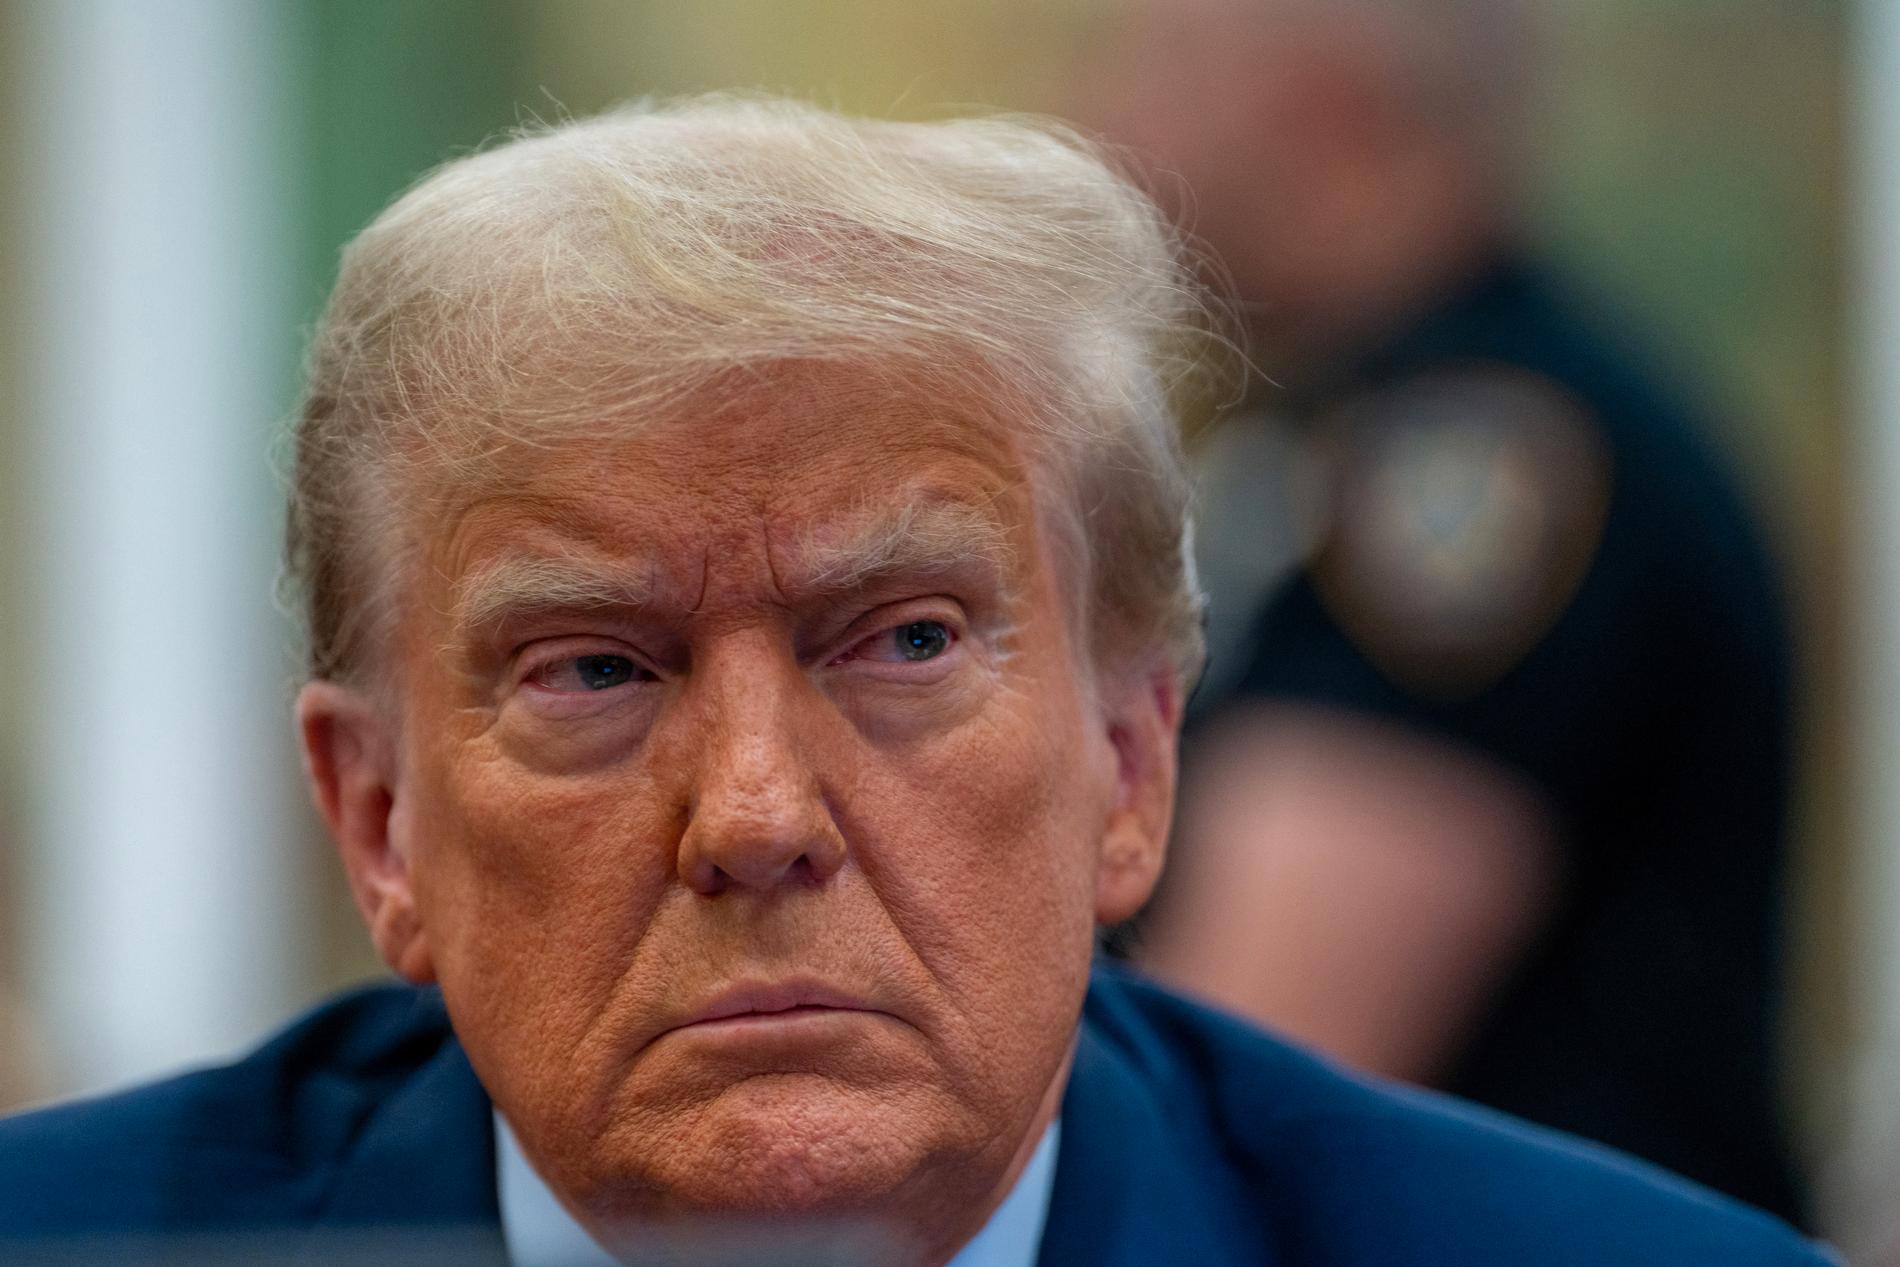 IN COURT: Former President Donald Trump explained himself before the New York Supreme Court on Monday in the case against the Trump Organization.